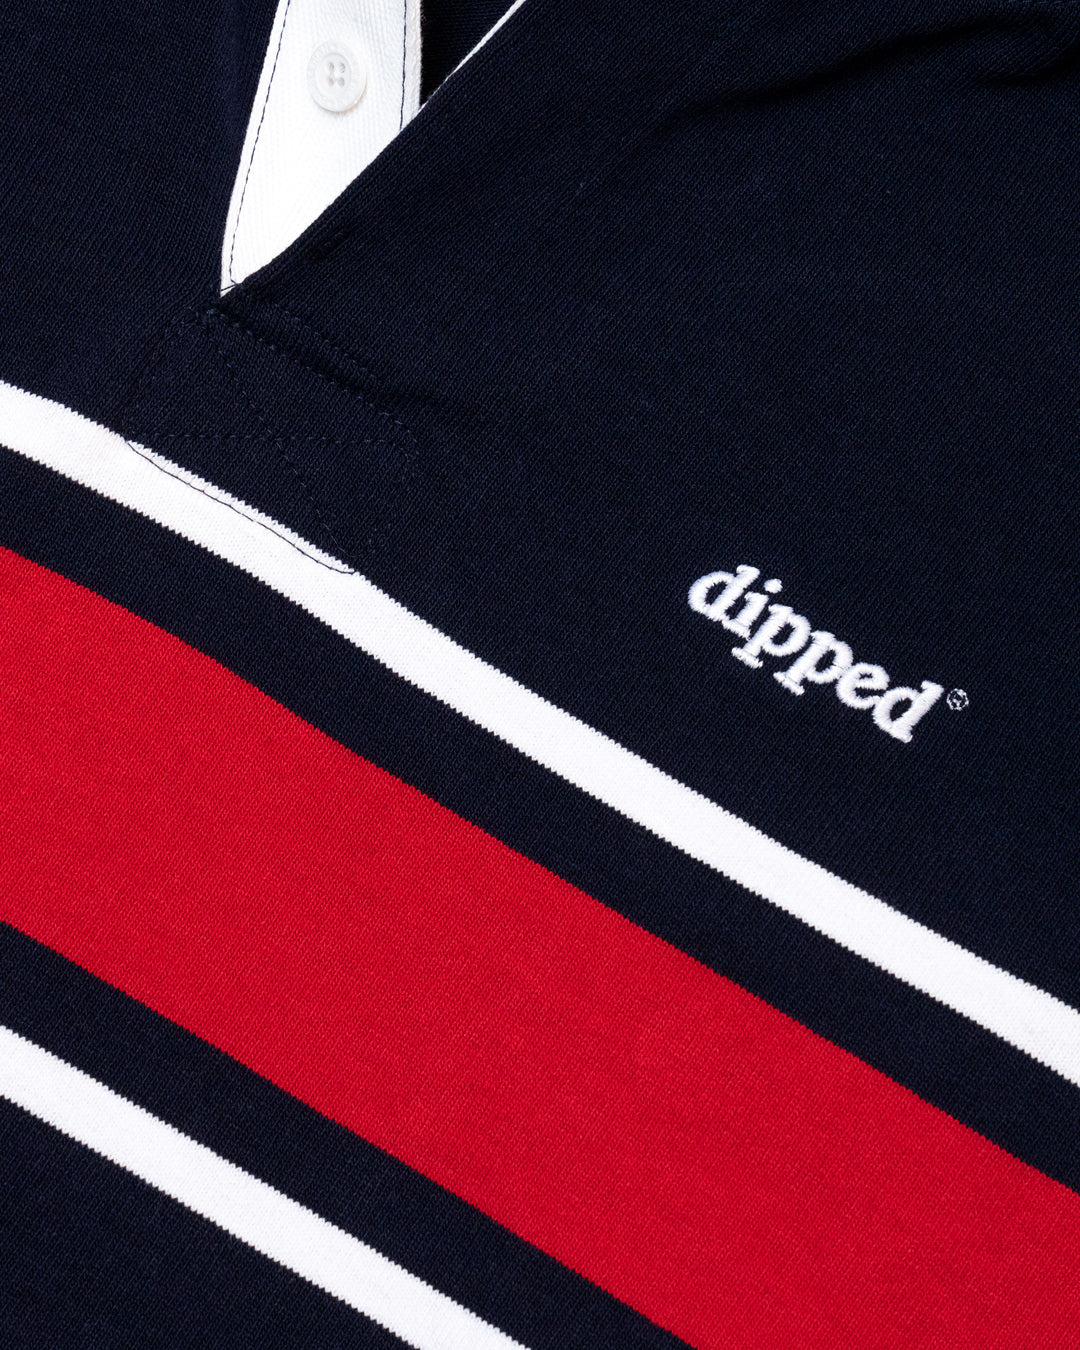 DIPPED Navy League Rugby Hoodie